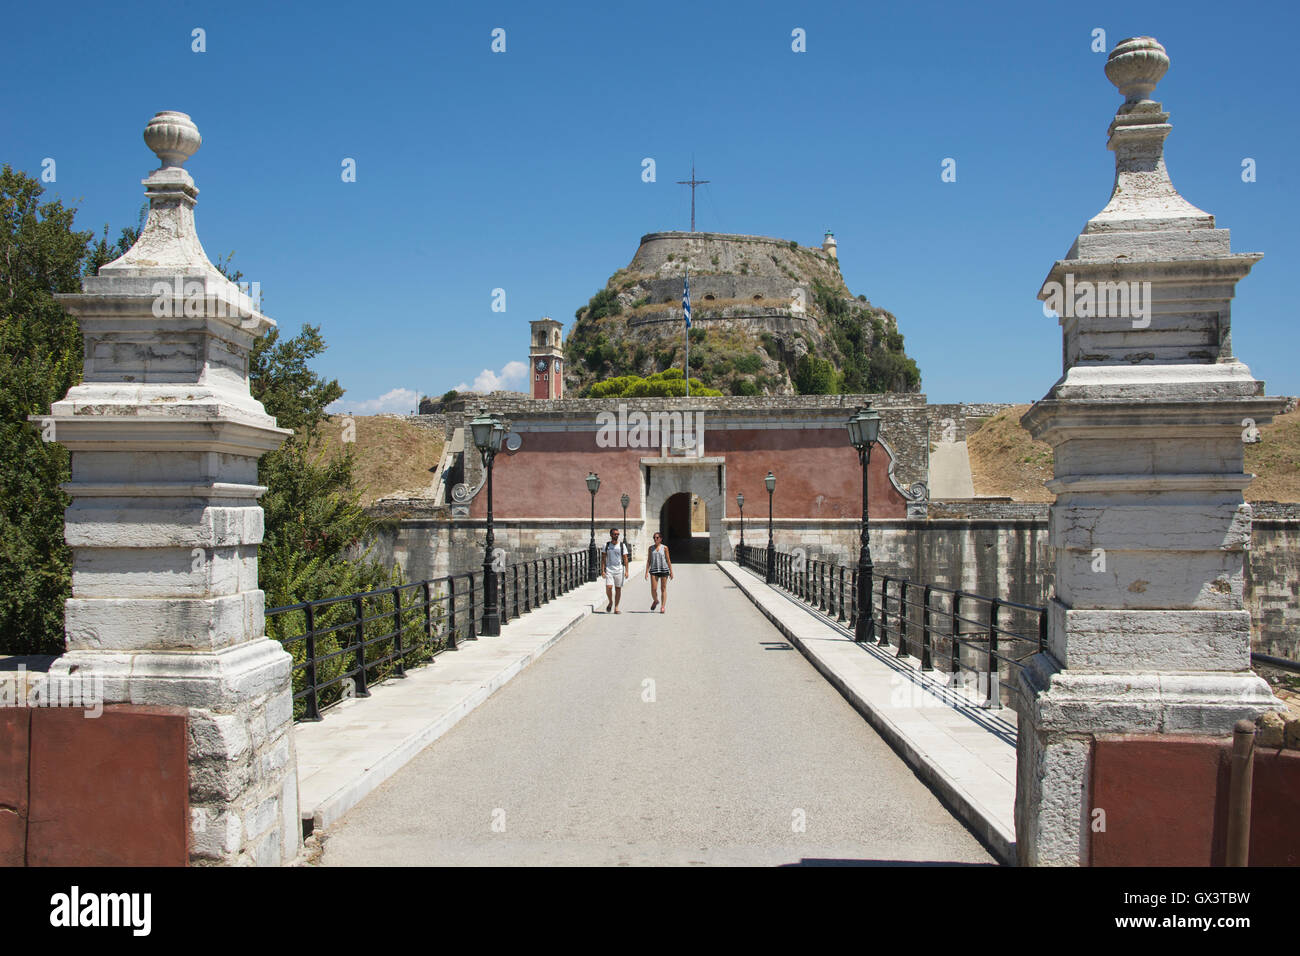 Entrance Old Fortress Corfu Old Town Ionian Islands Greece Stock Photo